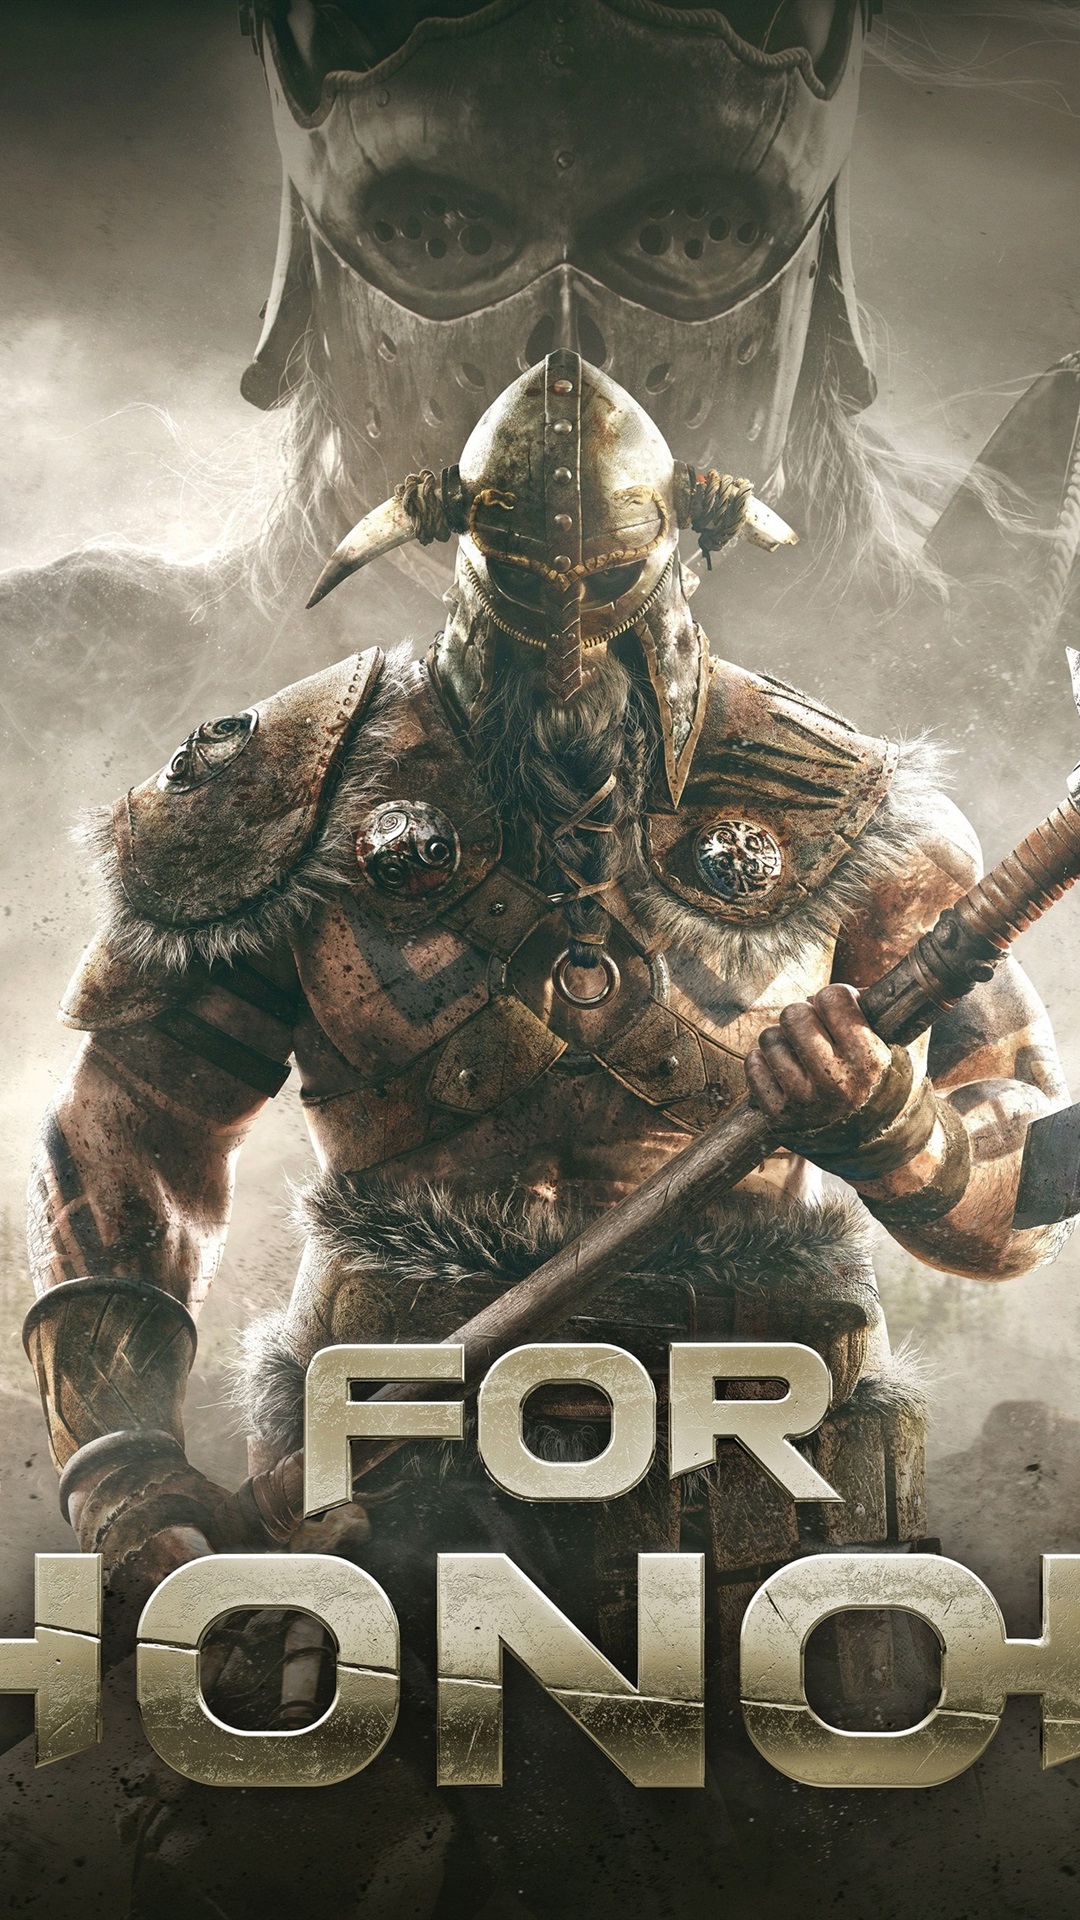 Iphone Wallpaper For Honor, Xbox Game - Honor Wallpaper Iphone X - HD Wallpaper 